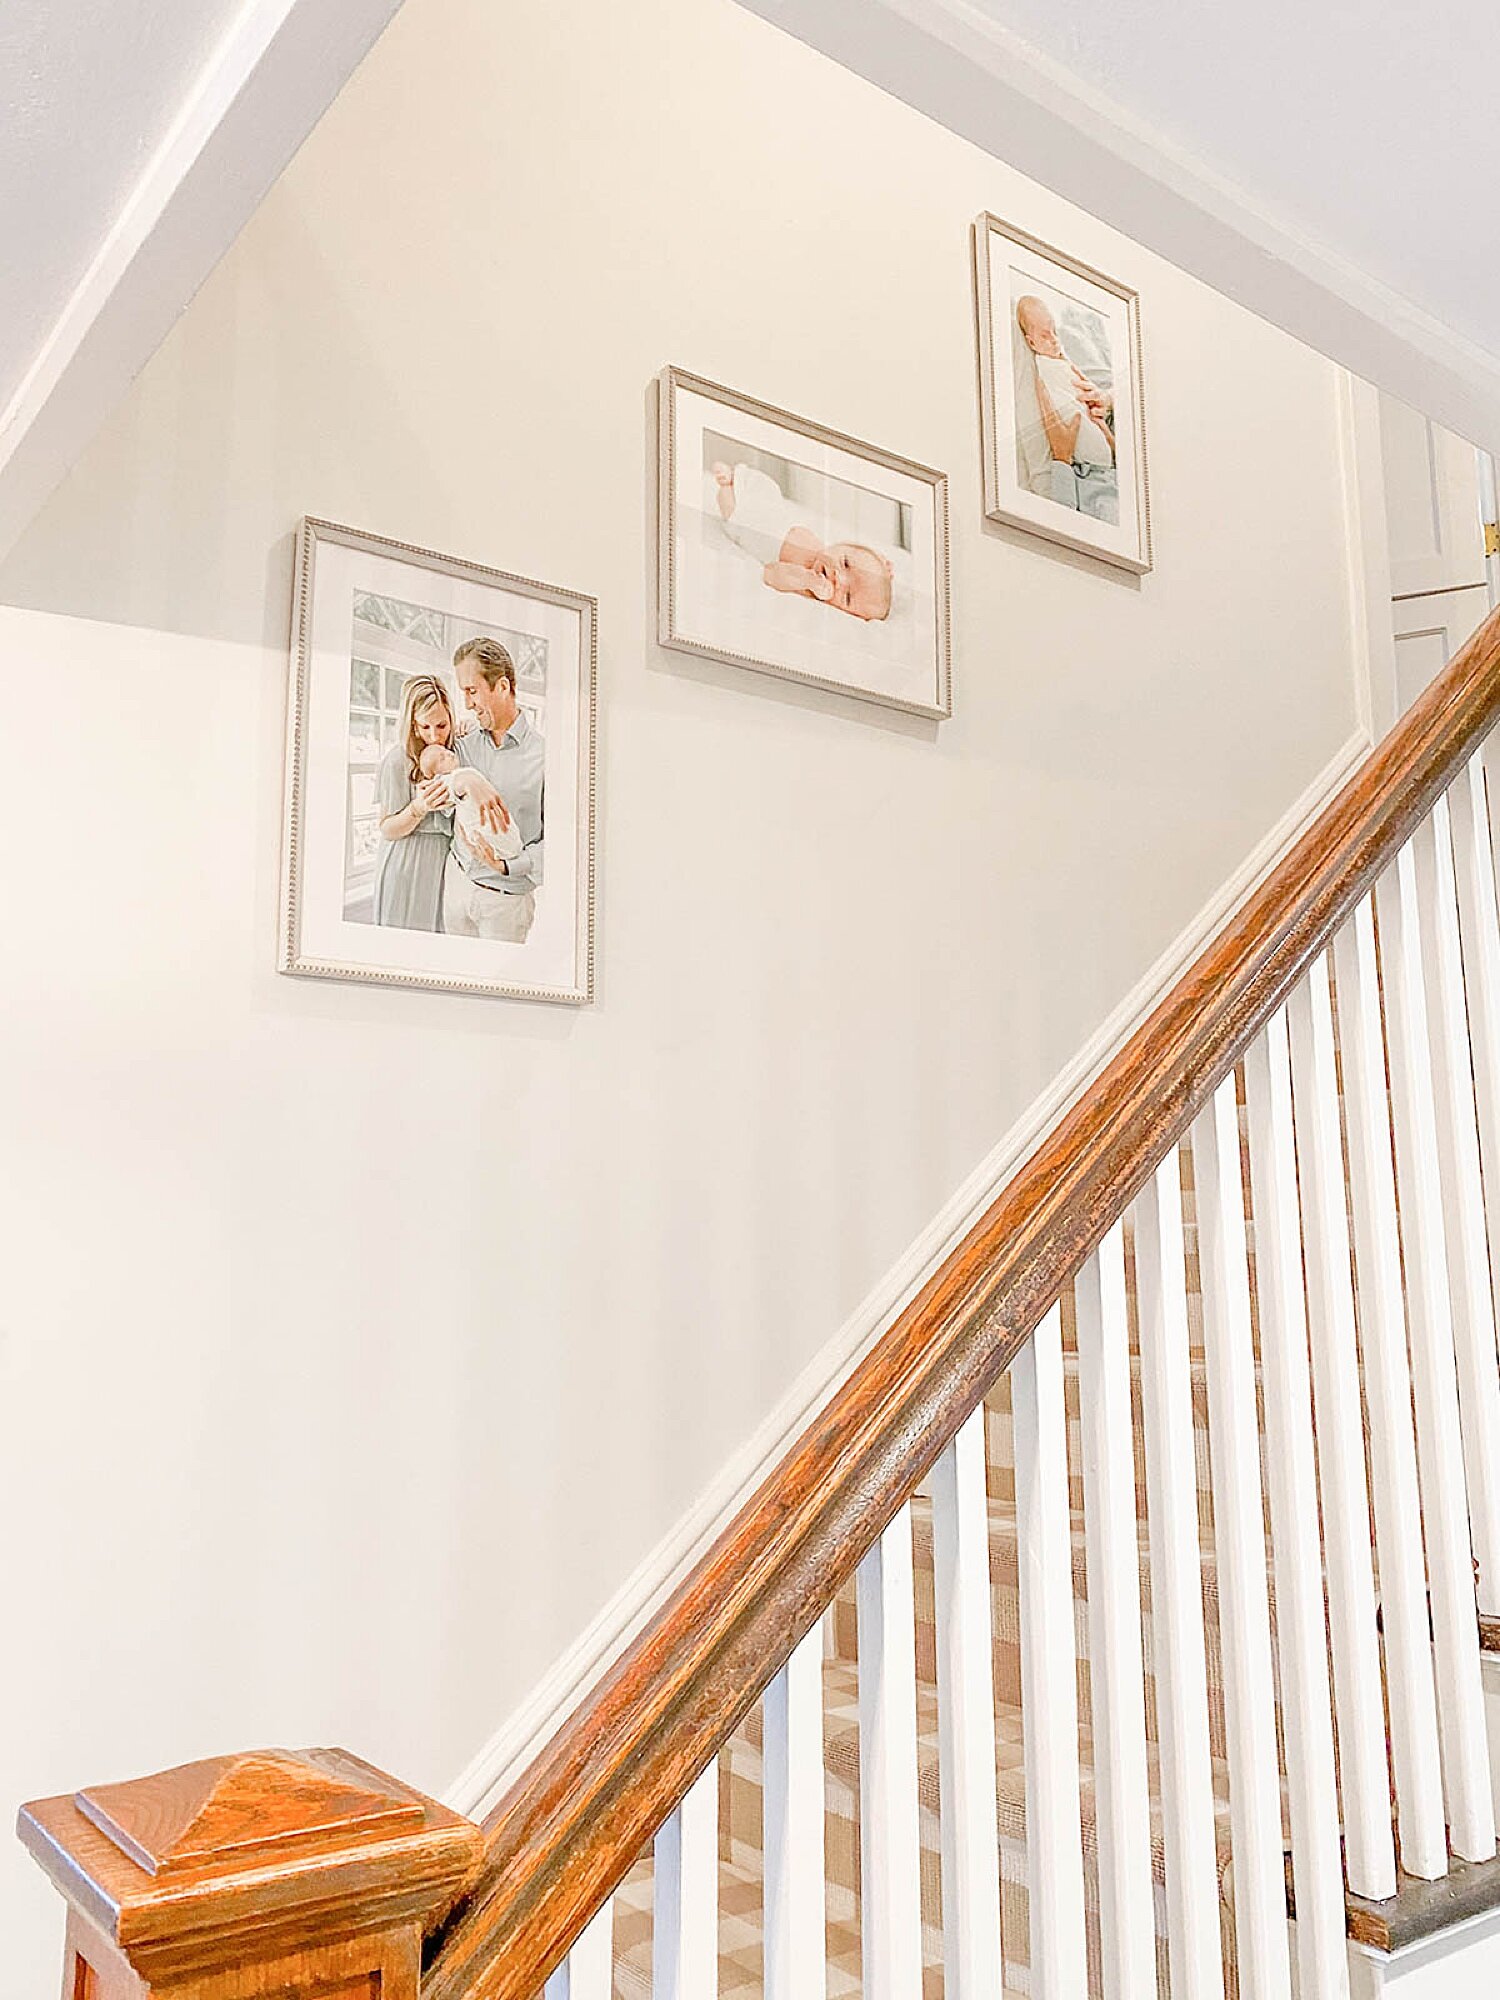 Custom framing in Darien, CT. Photos and frame installation by Connecticut Newborn Photographer, Kristin Wood Photography.